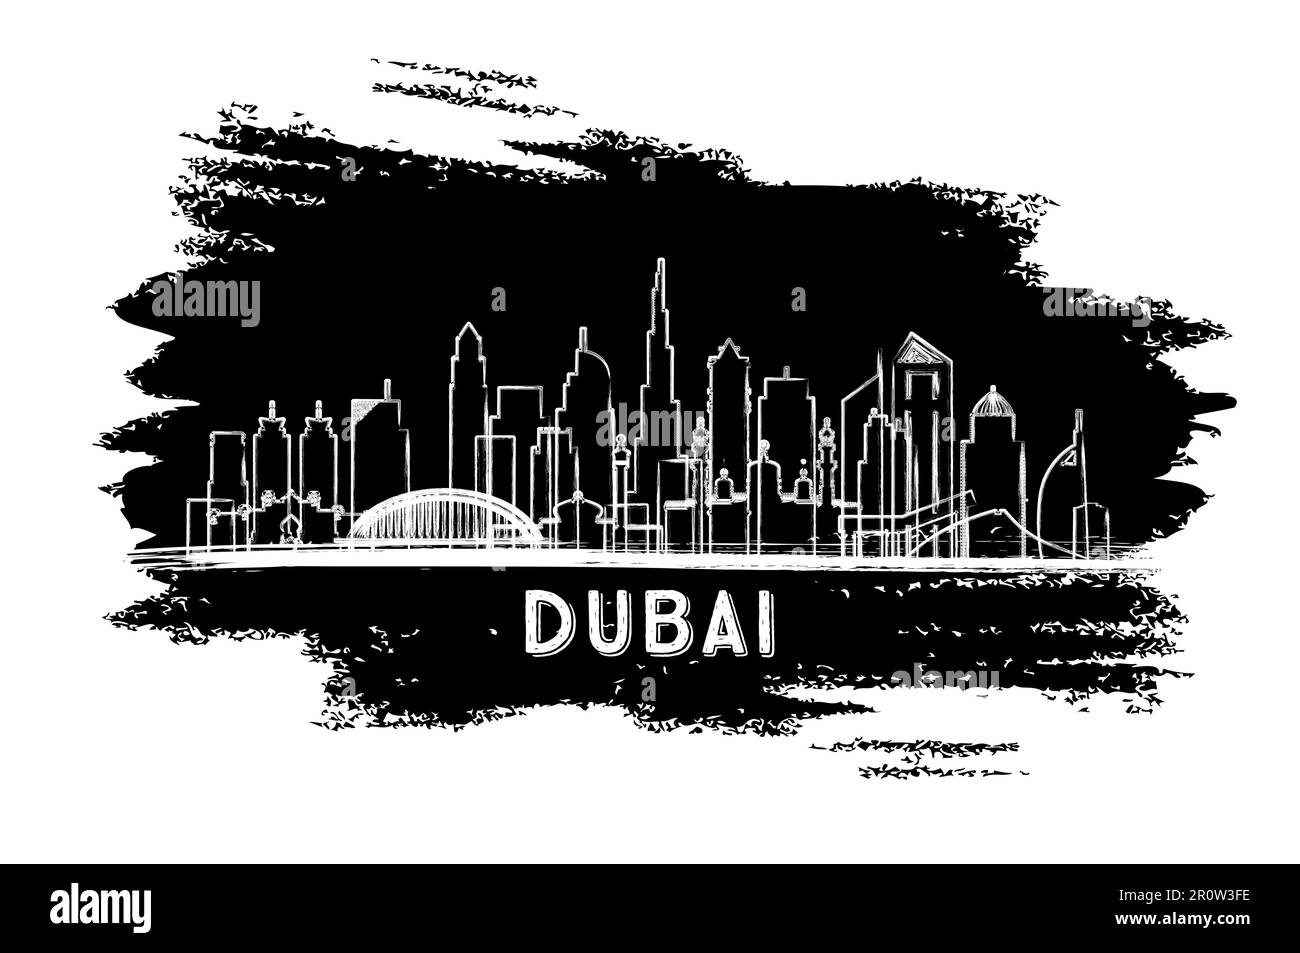 Dubai UAE City Skyline Silhouette. Hand Drawn Sketch. Business Travel and Tourism Concept with Historic Architecture. Vector Illustration. Stock Vector